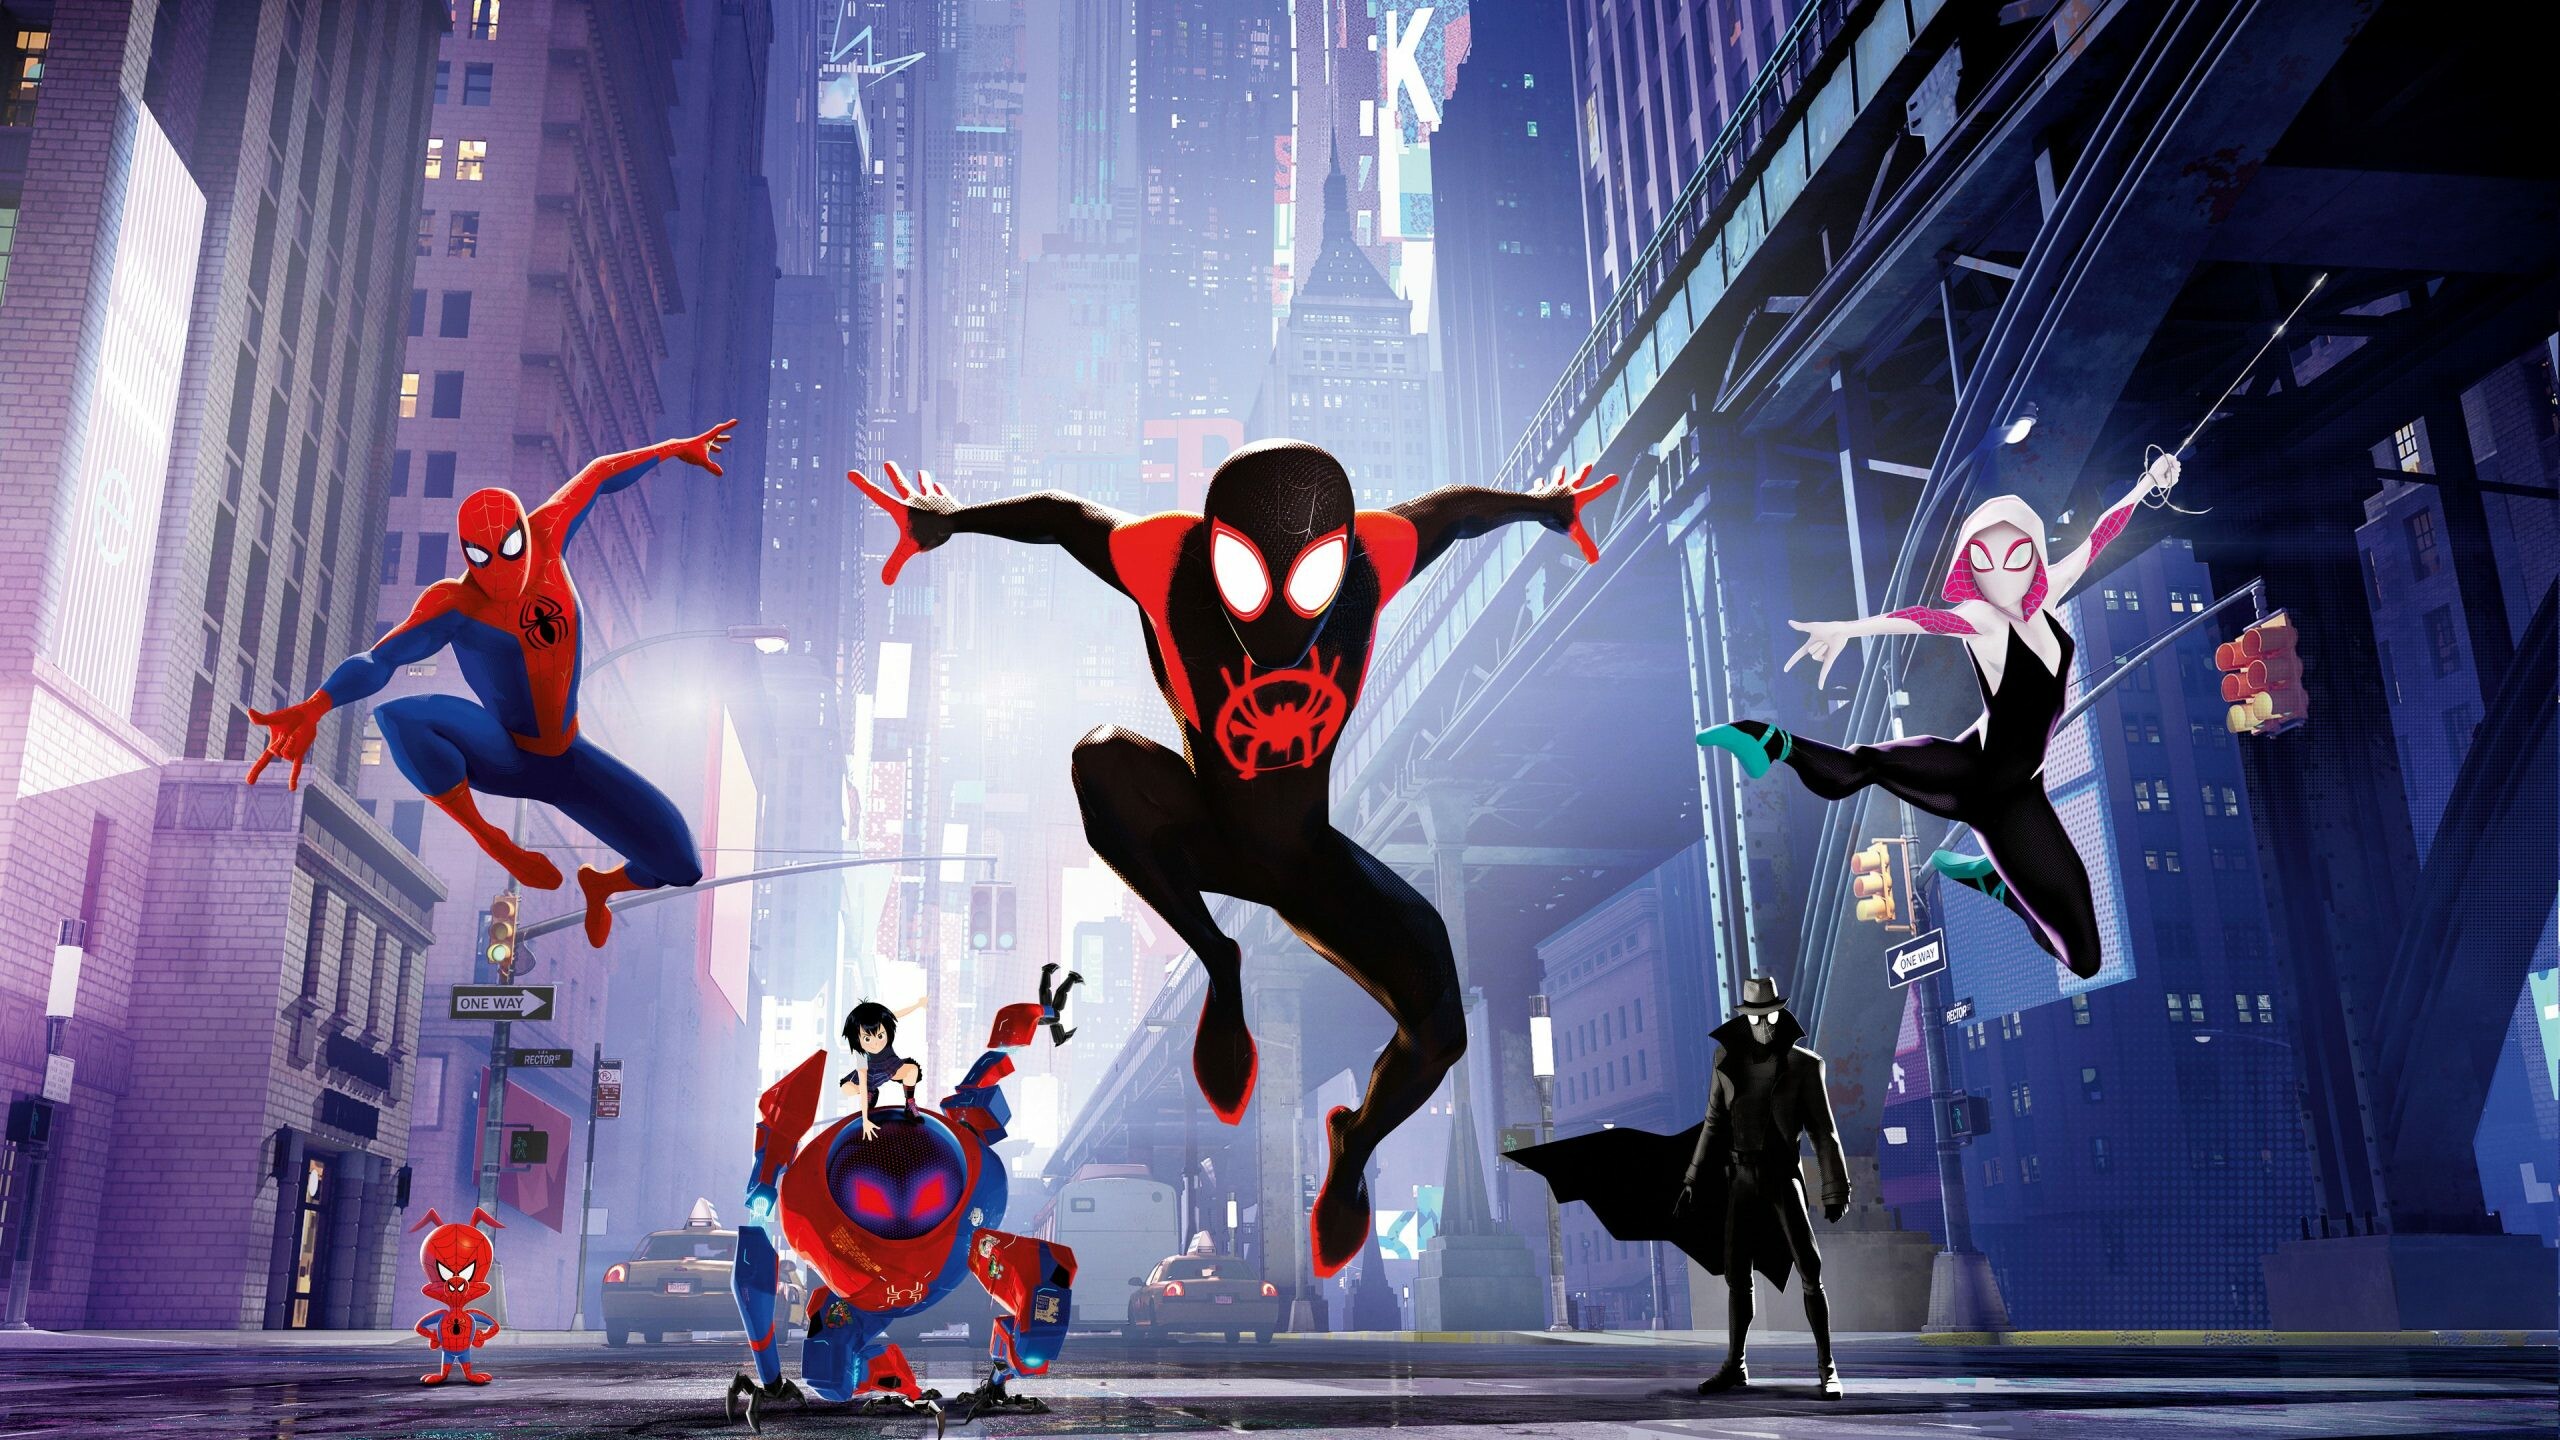 Spider-Man: Into the Spider-Verse: Miles Morales, Peter B. Parker, Gwen Stacy, Peni Parker, SP//dr. 2560x1440 HD Wallpaper.